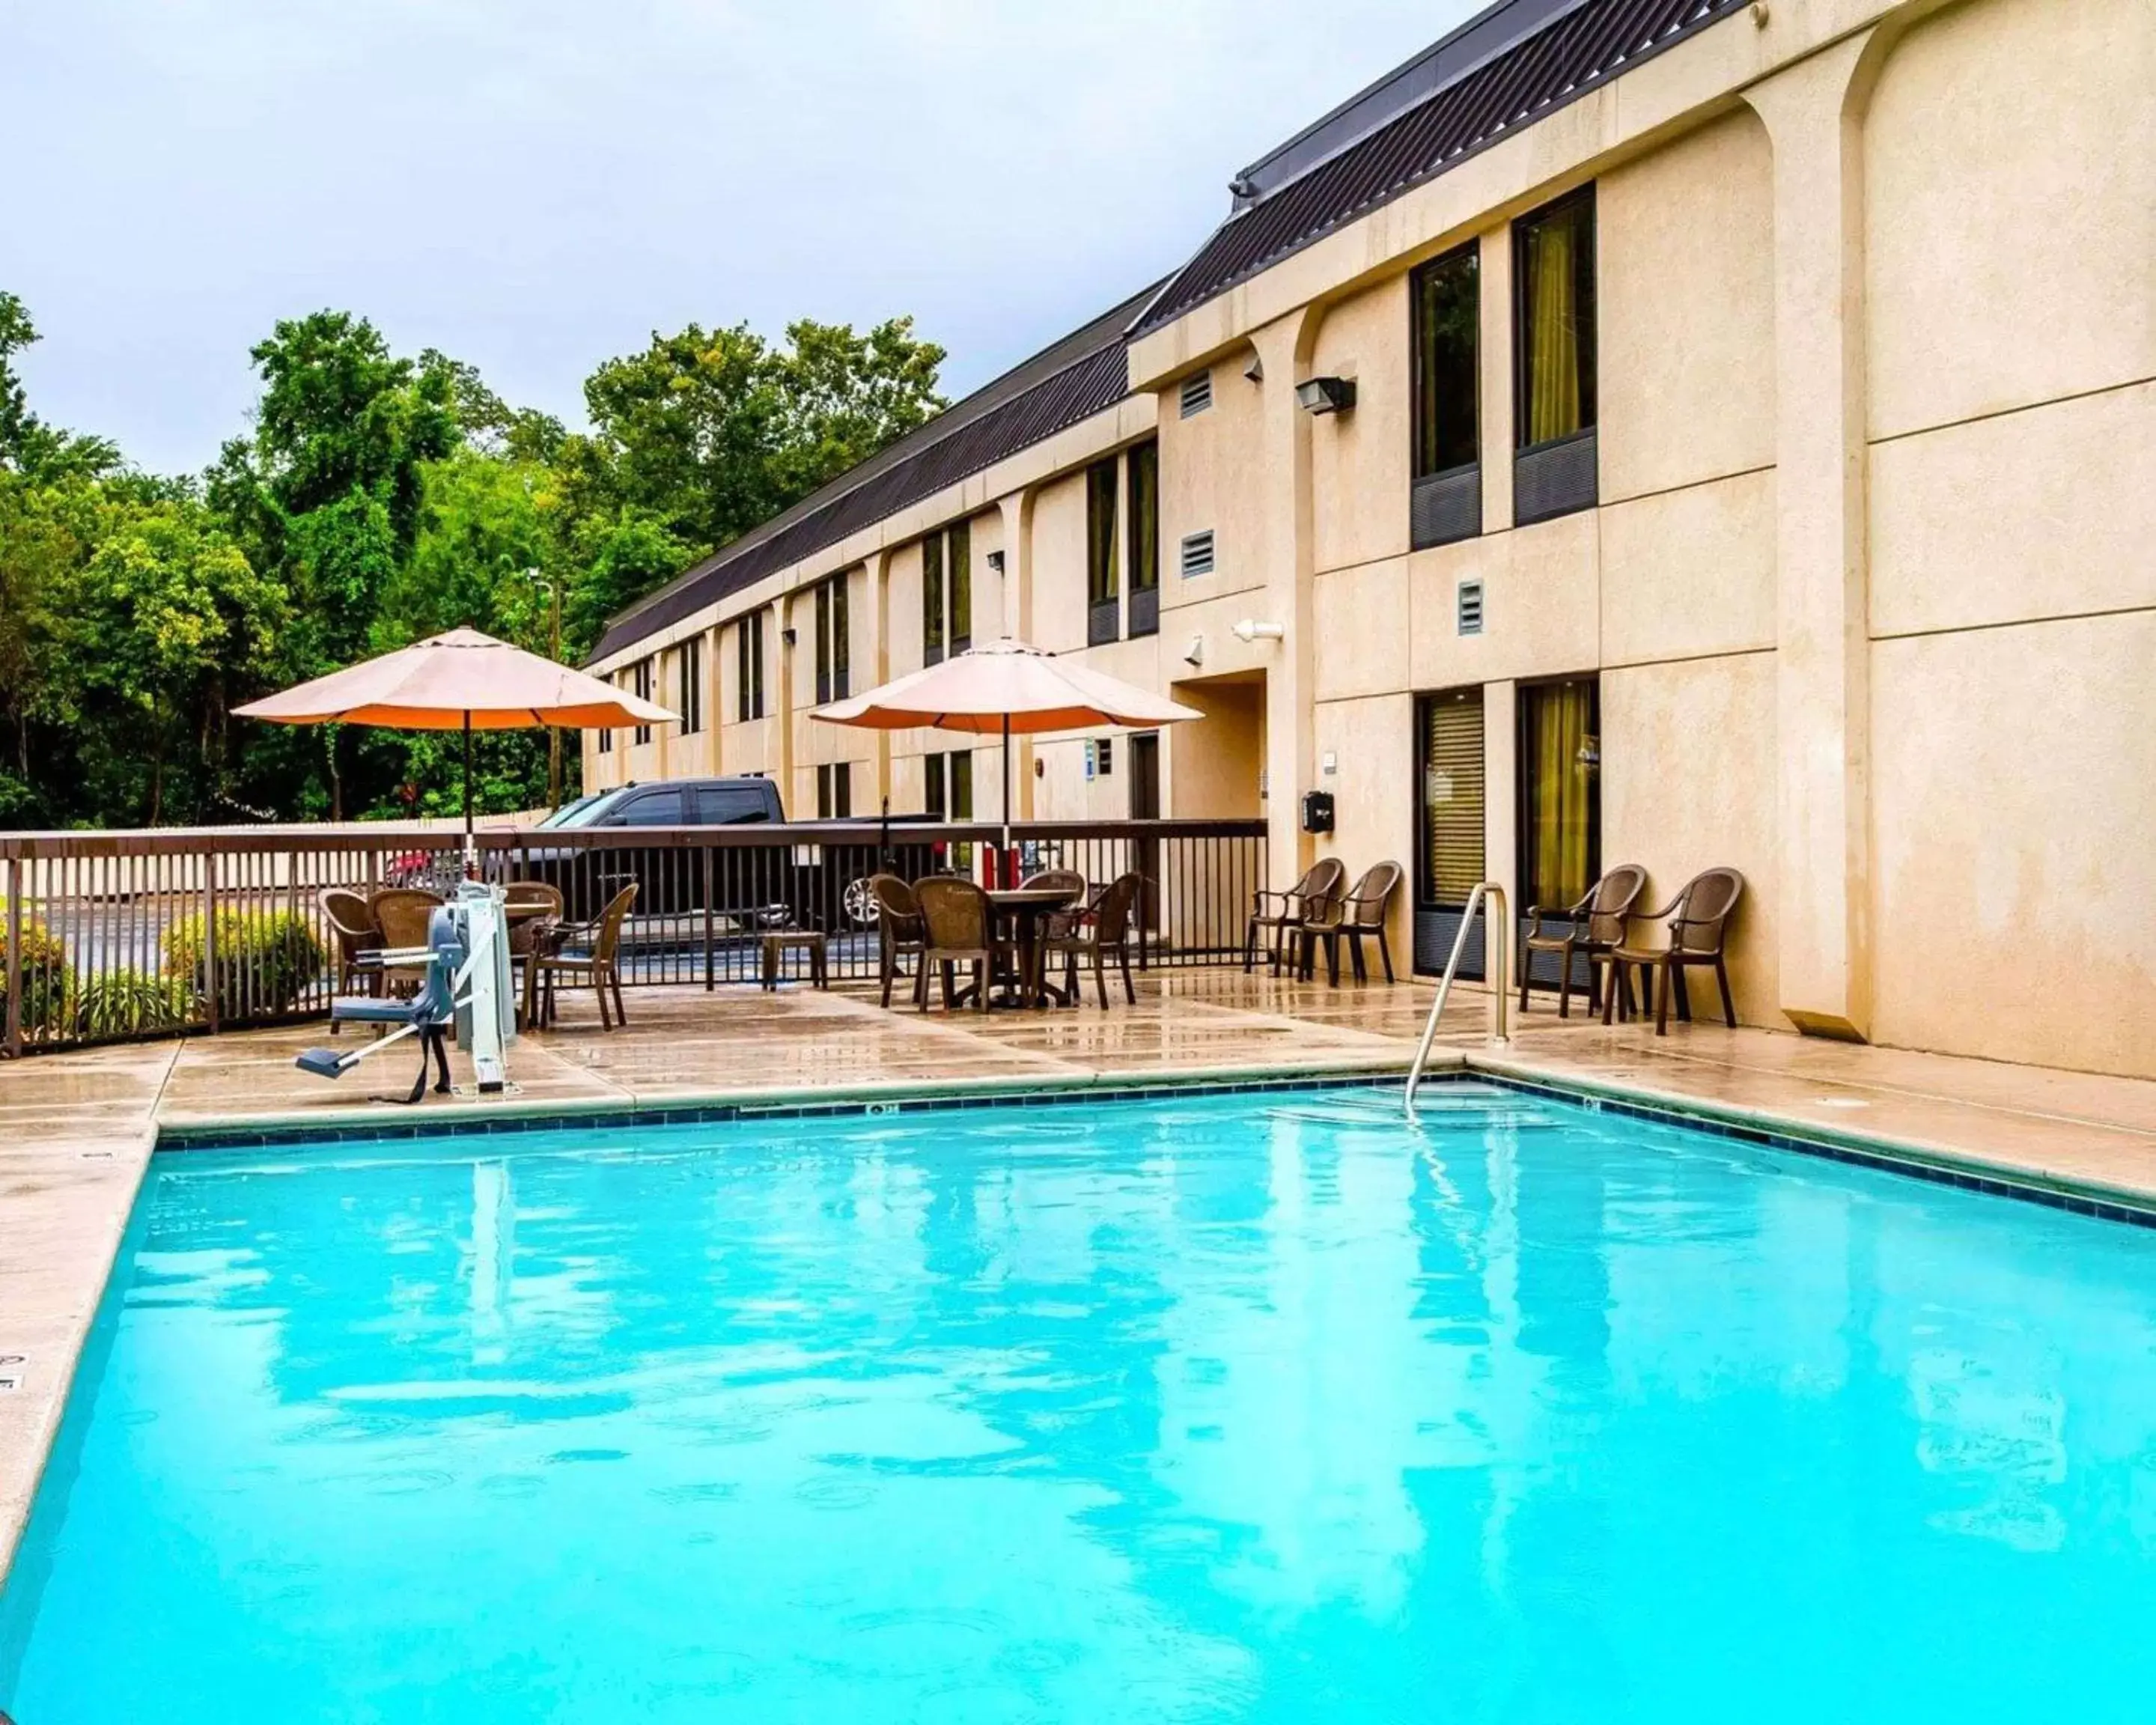 On site, Swimming Pool in Clarion Inn near Lookout Mountain